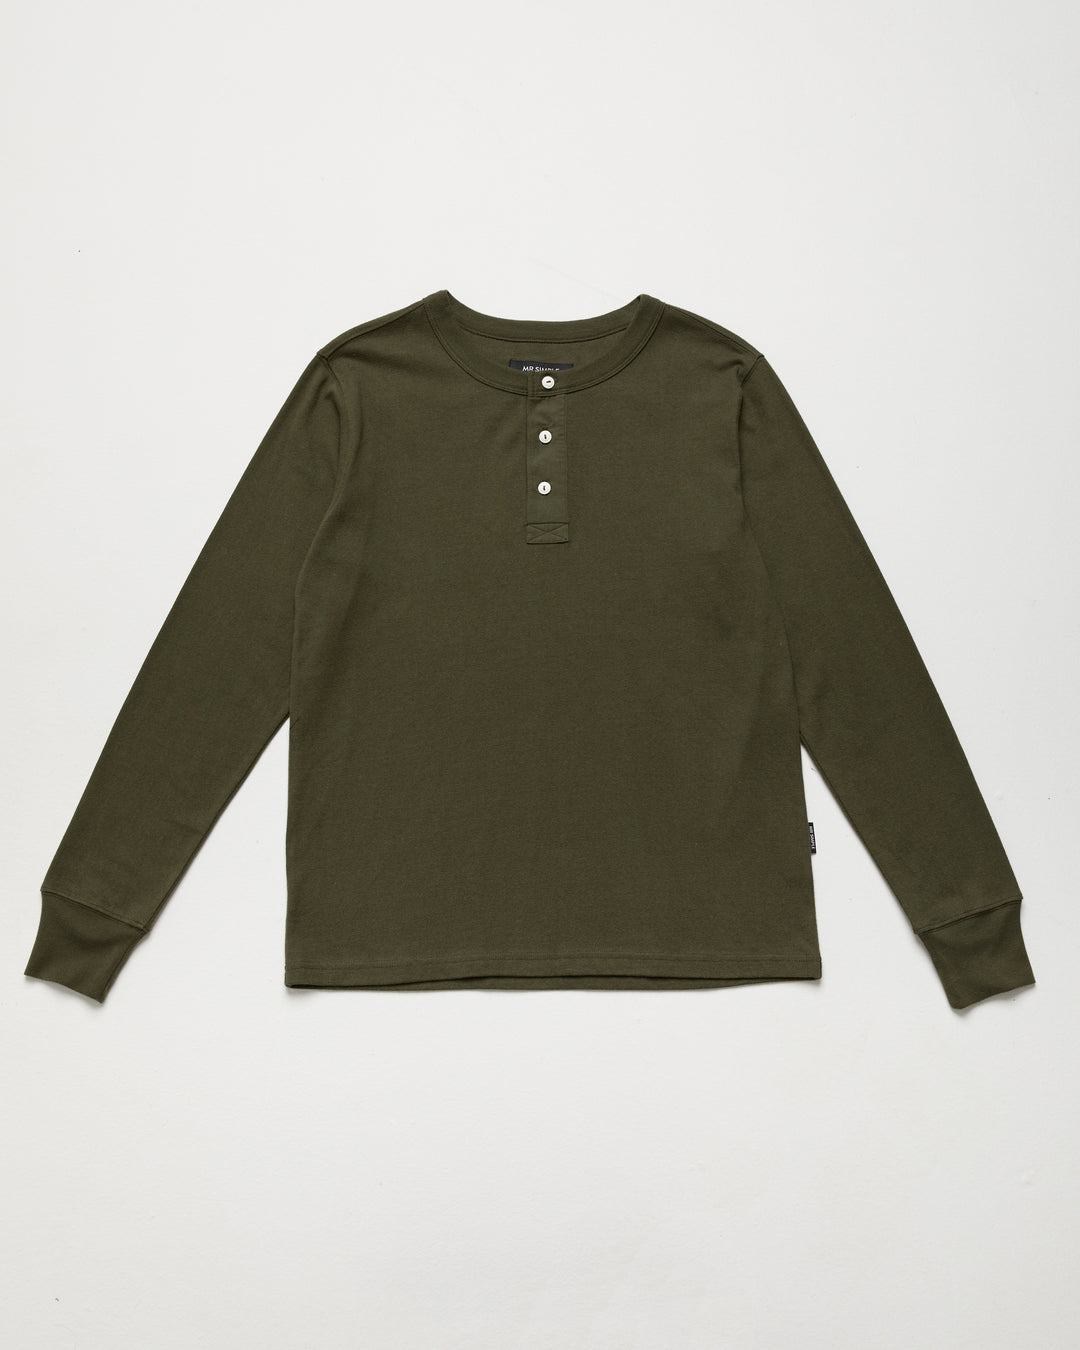 Mr Simple - Henley Longsleeve Tee in Army | Buster McGee Daylesford